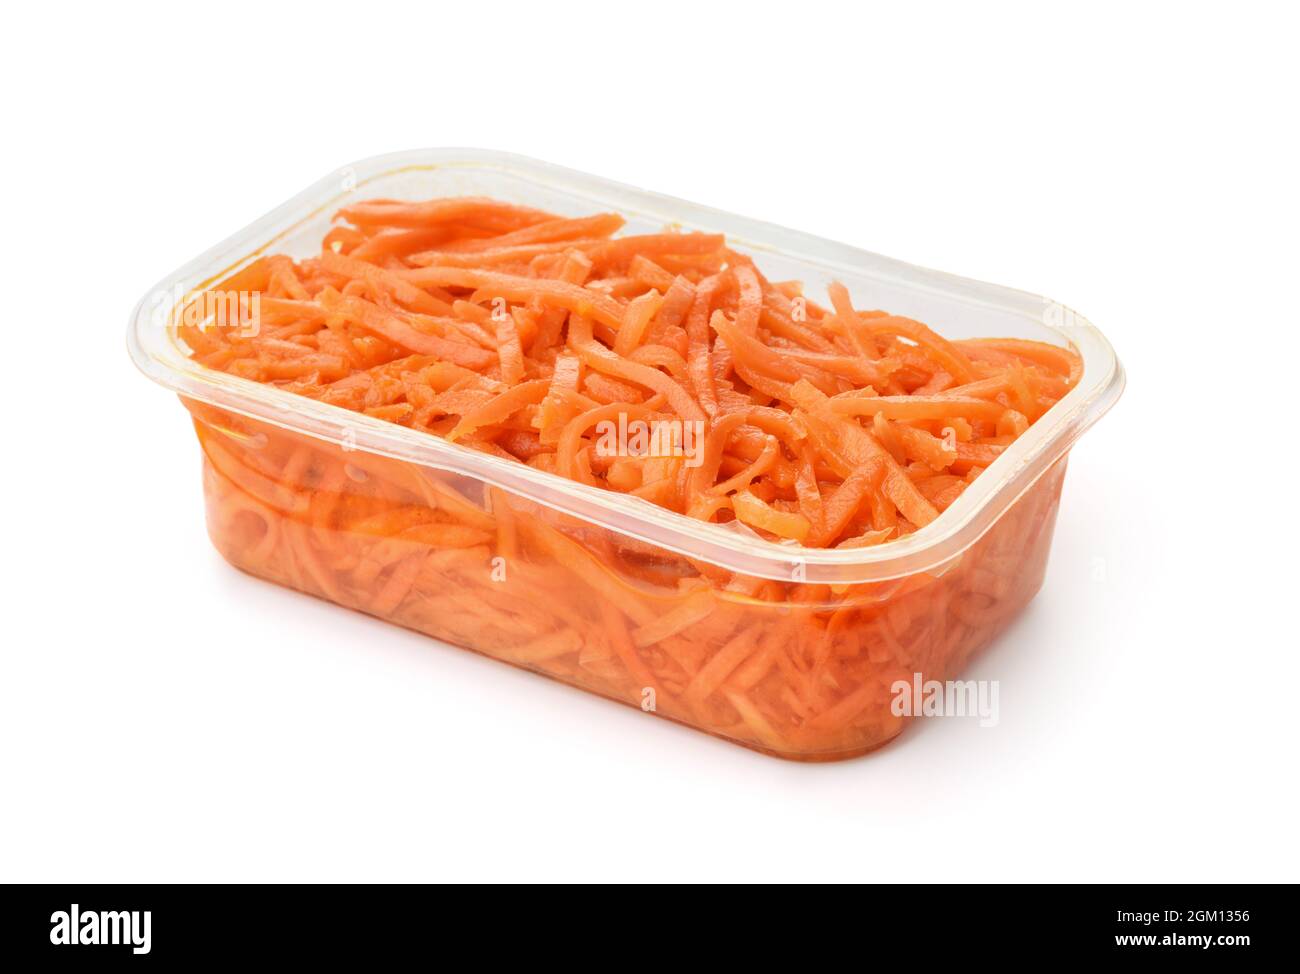 Plastic container of pickled shredded carrot isolated on white Stock Photo